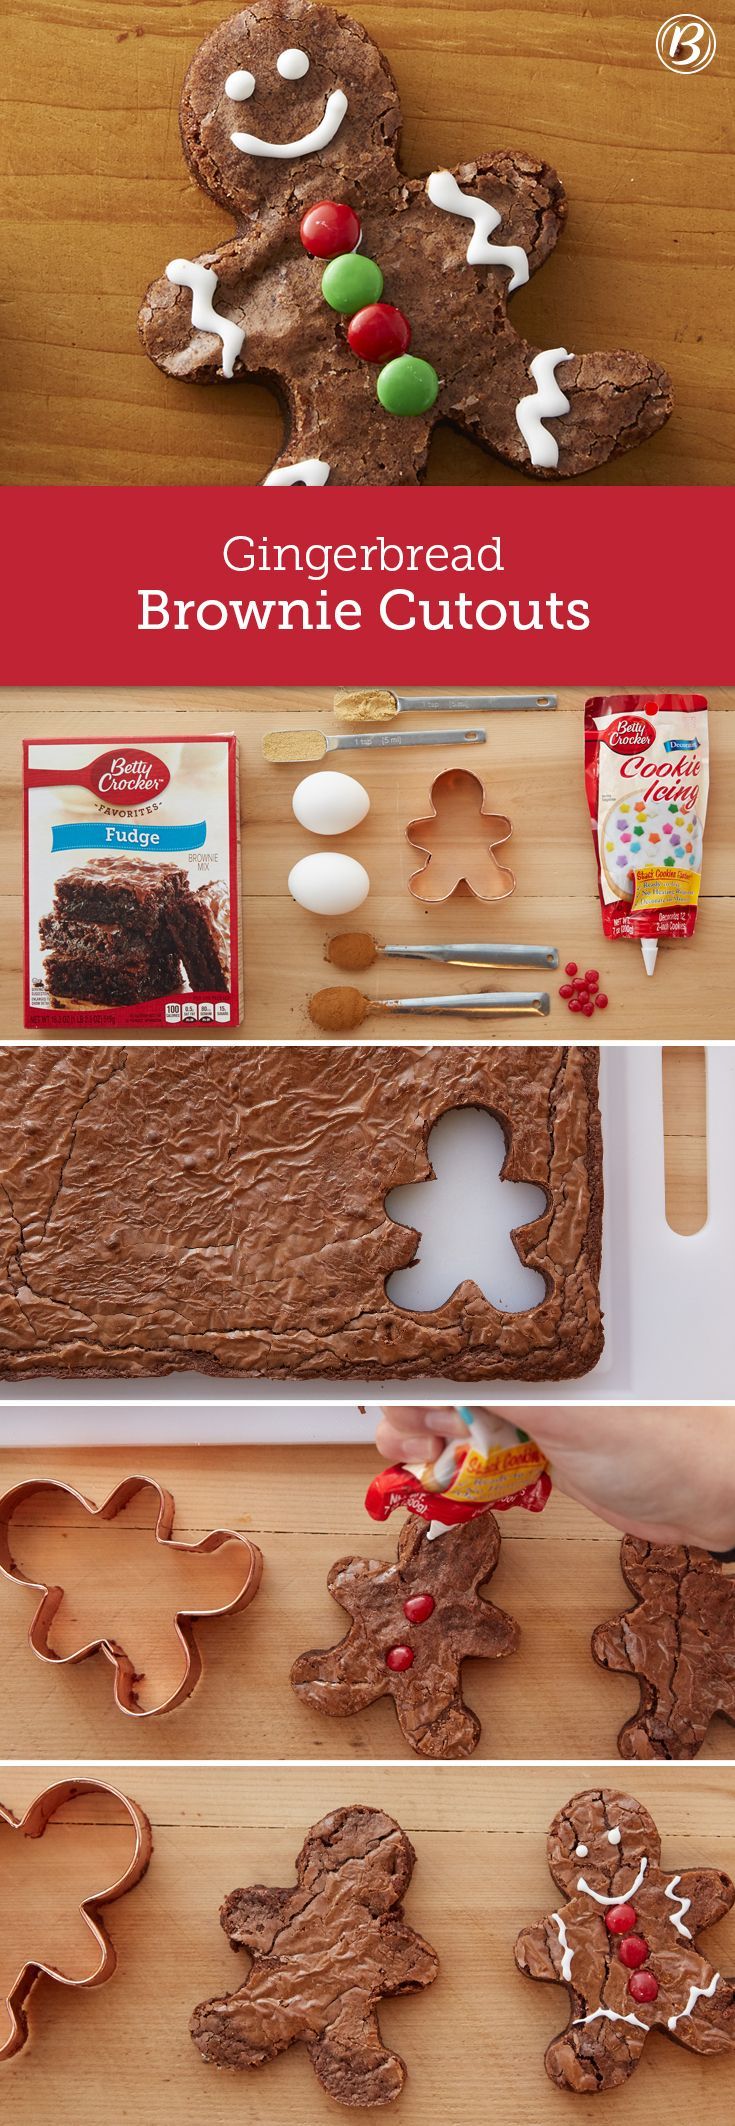 Cute and playful, these gingerbread-spiced brownie cutouts are an easy holiday project for the kids to help with! You can use